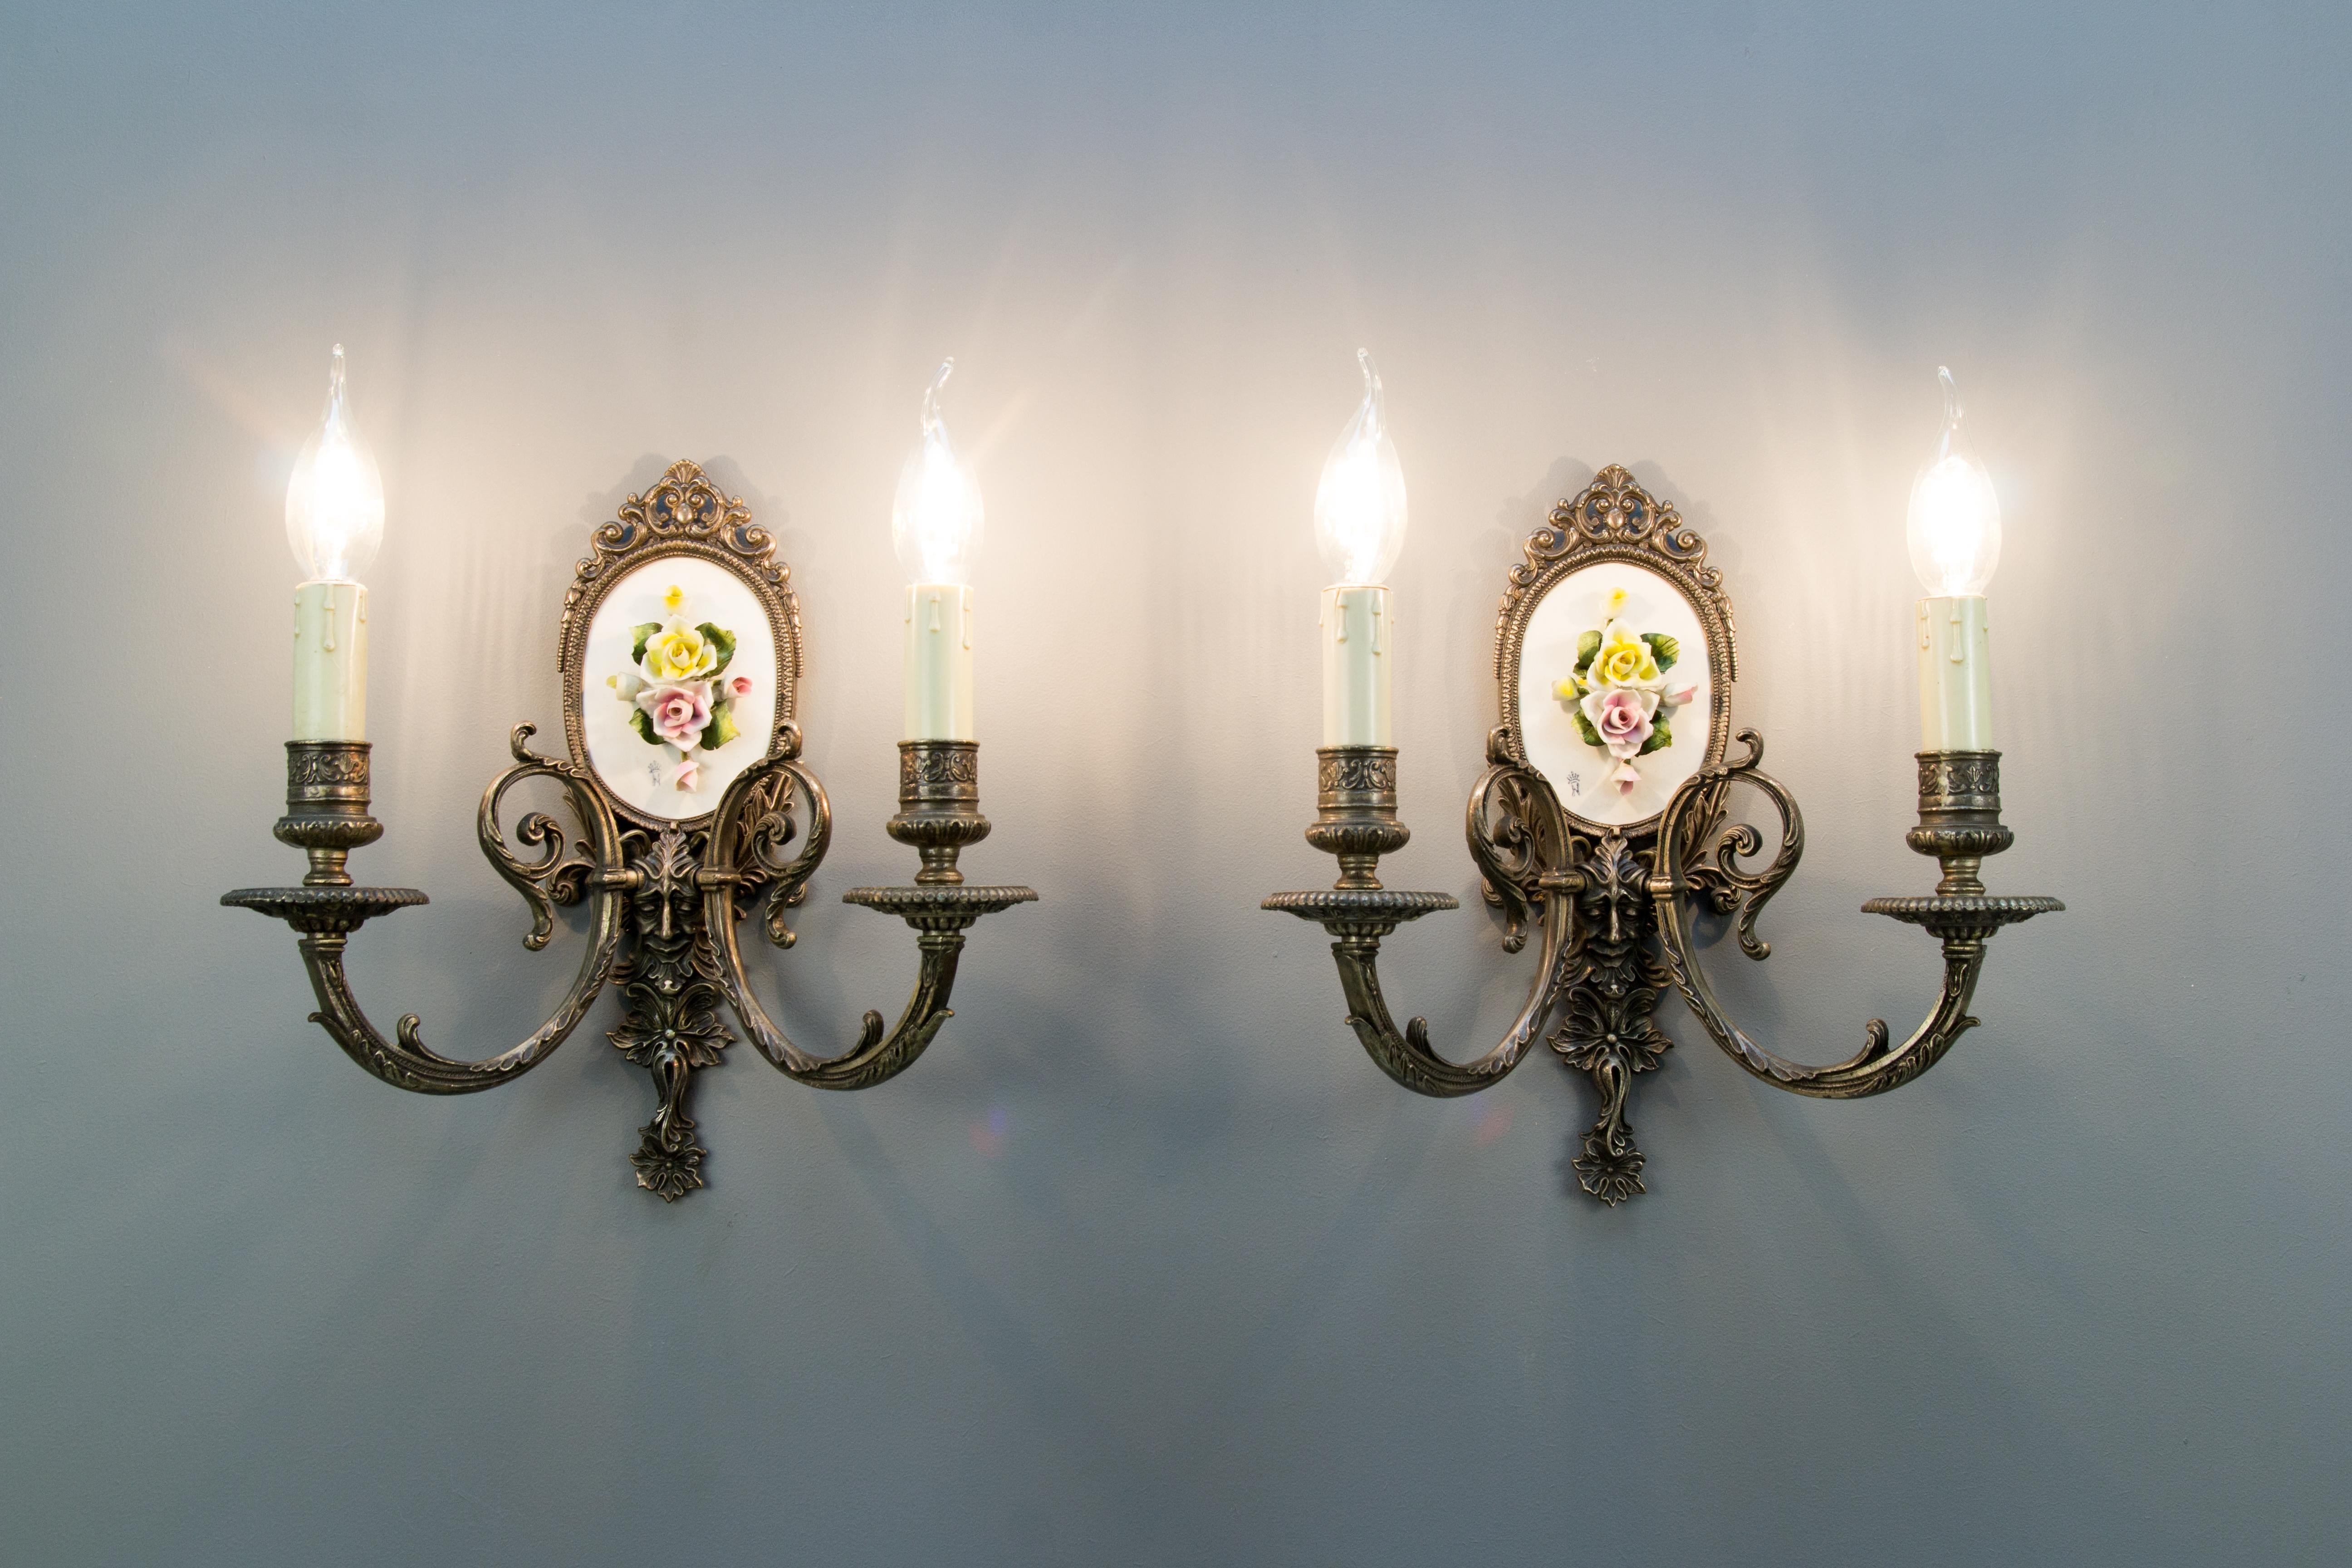 Beautiful Italian sconces decorated with Capodimonte porcelain flowers and finely made brass decors - Bacchus heads – in the center of each sconce; each sconce featuring two arms with sockets for E 14 light bulbs. Marked with the blue Capodimonte